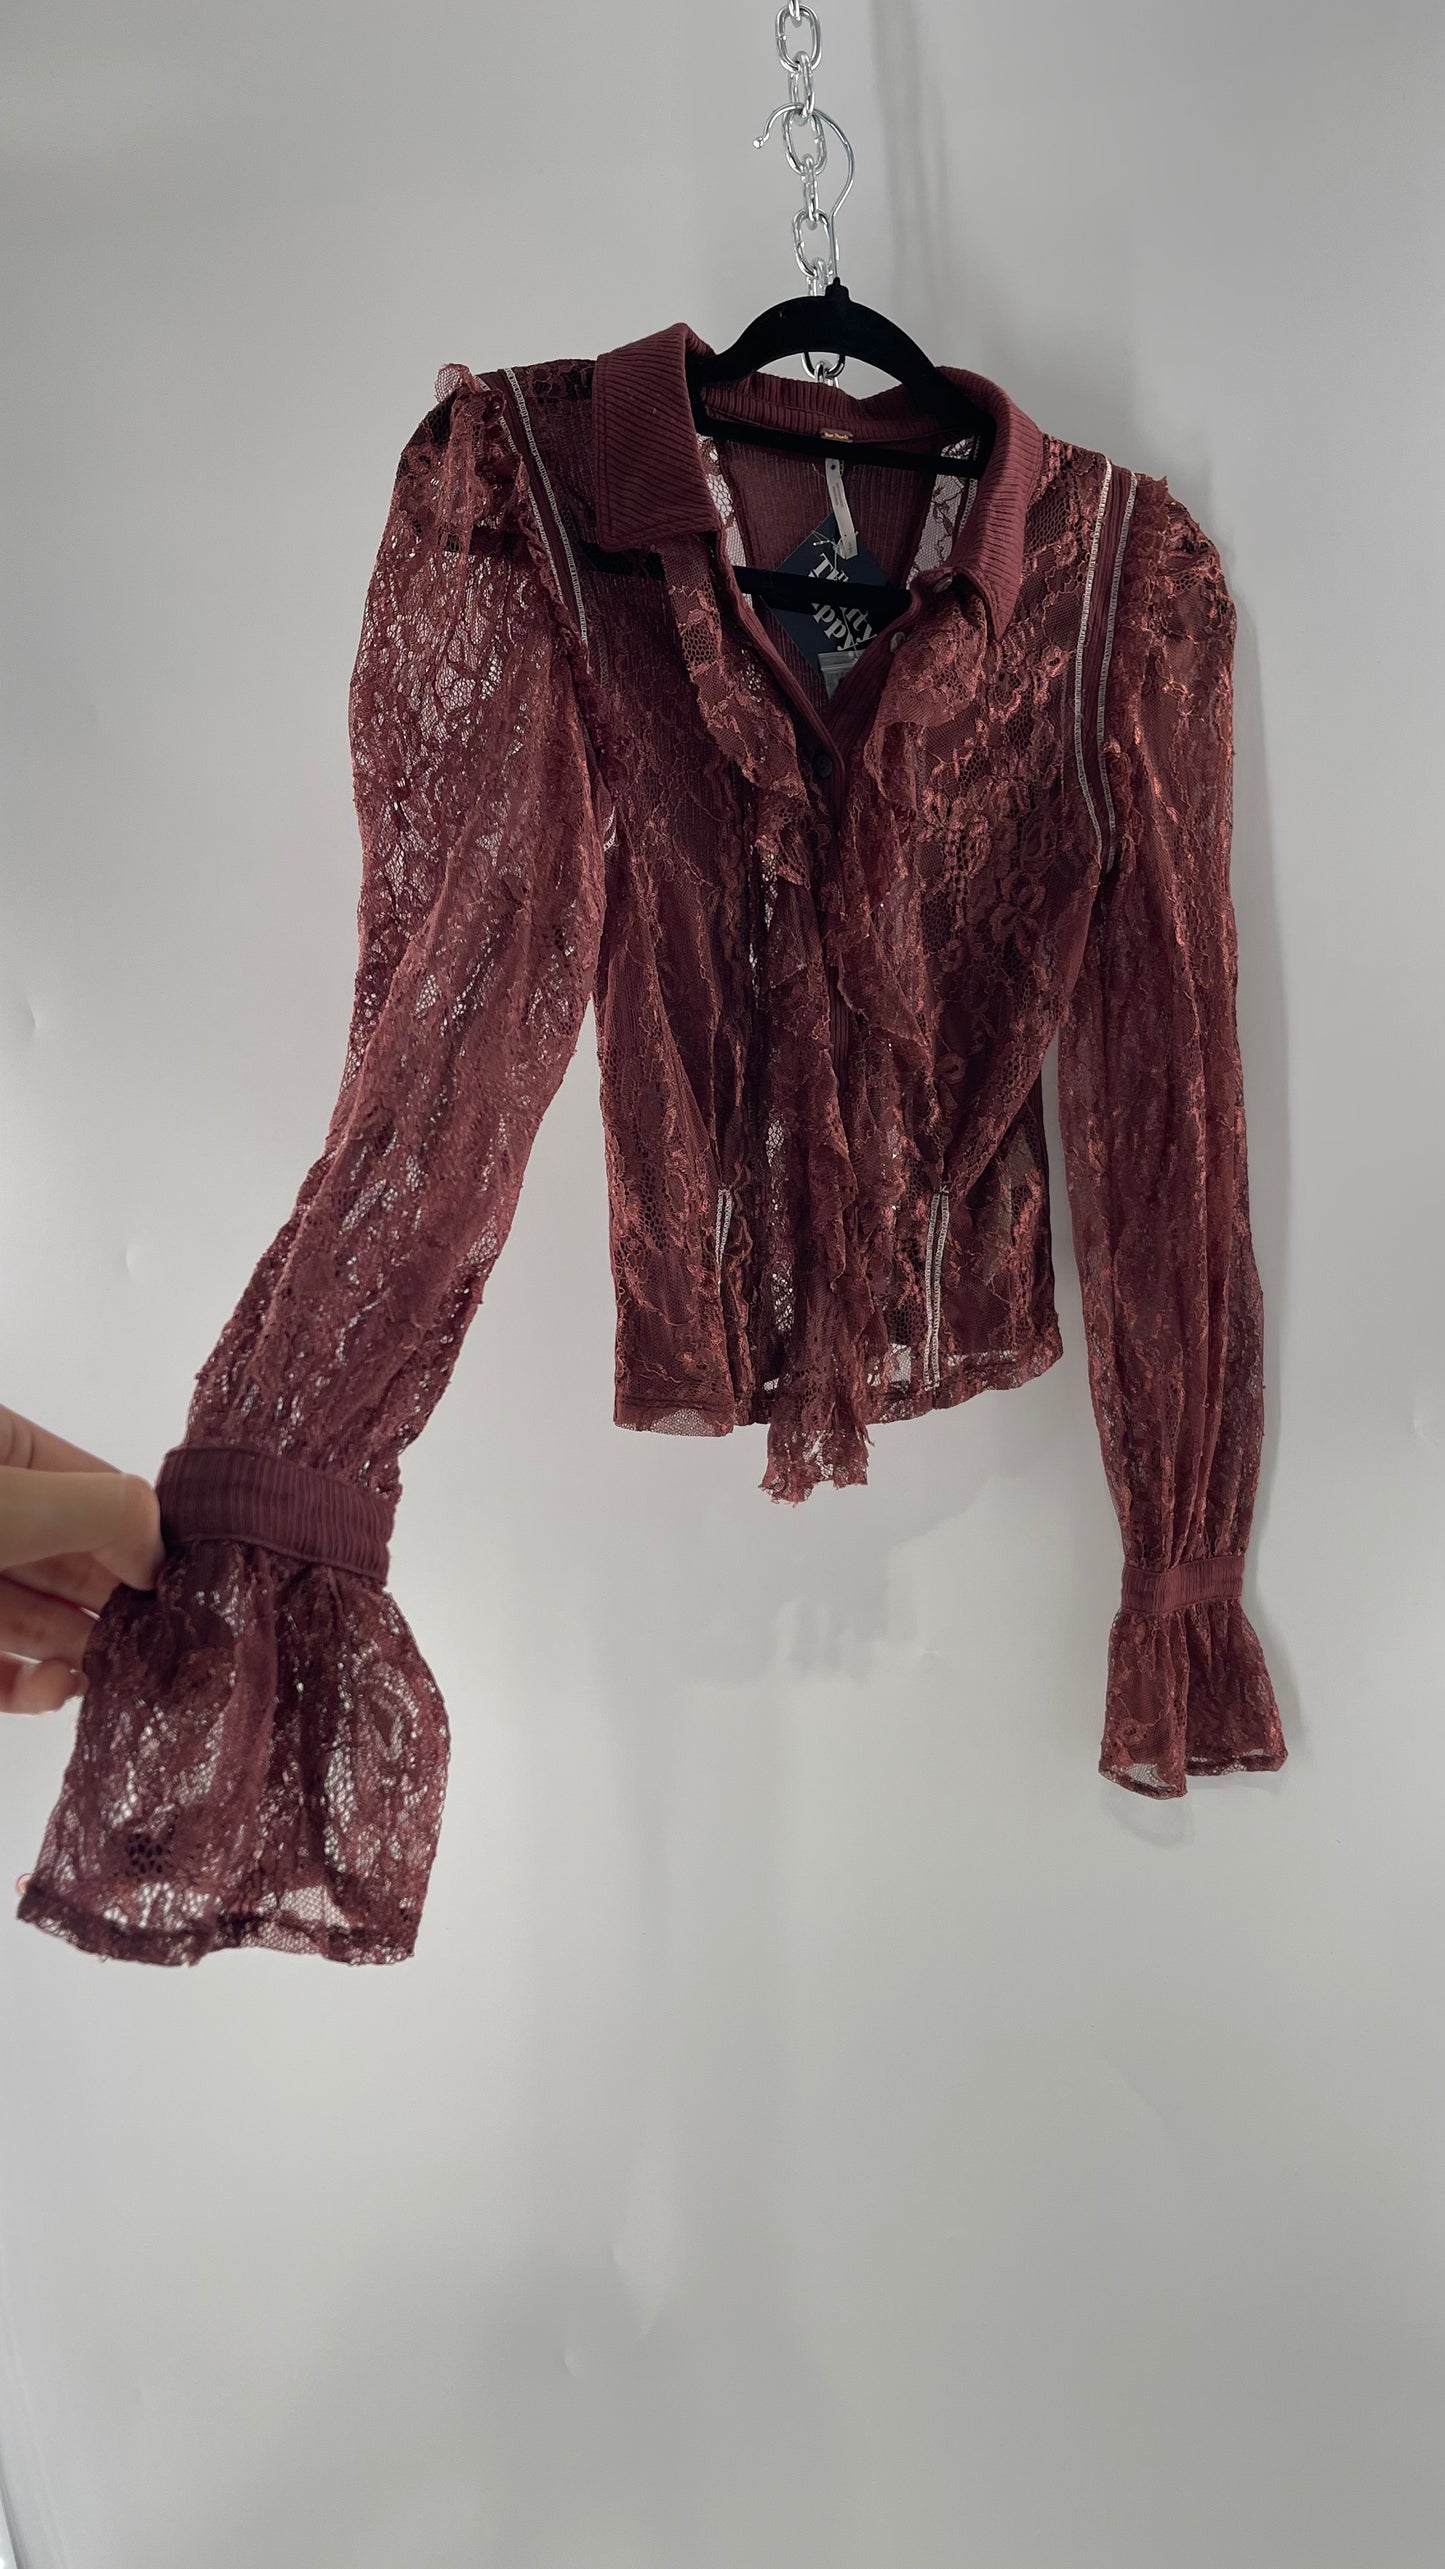 Free People Burgundy Lace Button Front Blouse with Balloon Sleeves and Ruffle Front Detail  (Small)